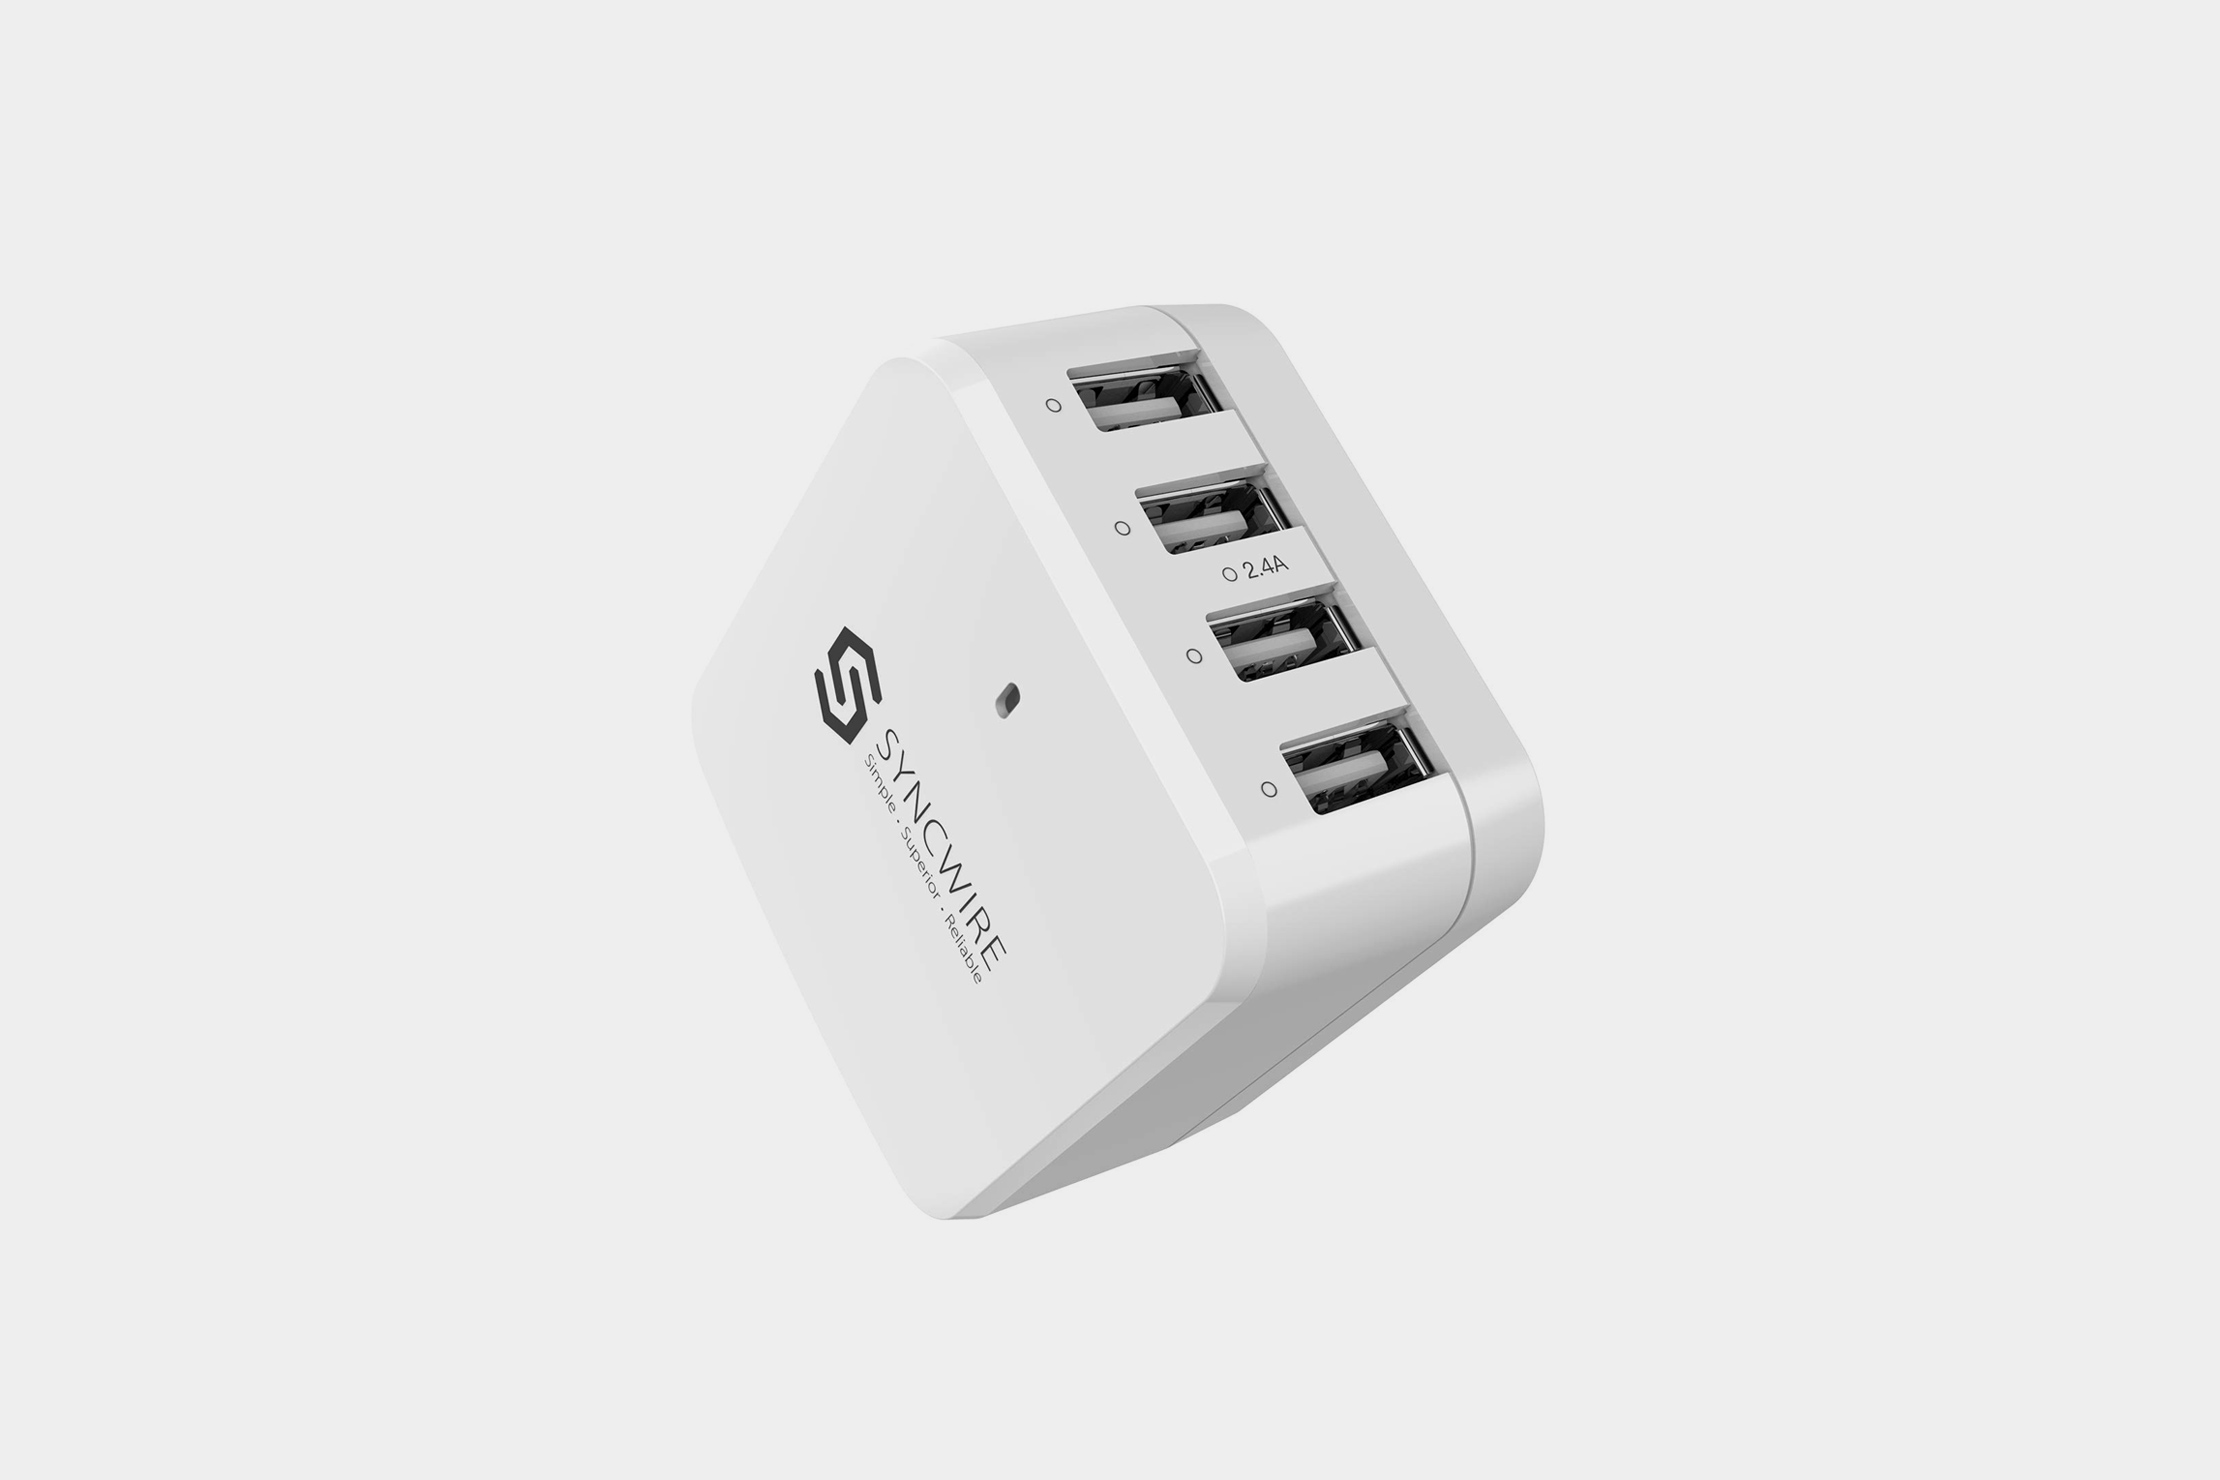 Syncwire SW-AC01 four-port USB charger review - The Gadgeteer